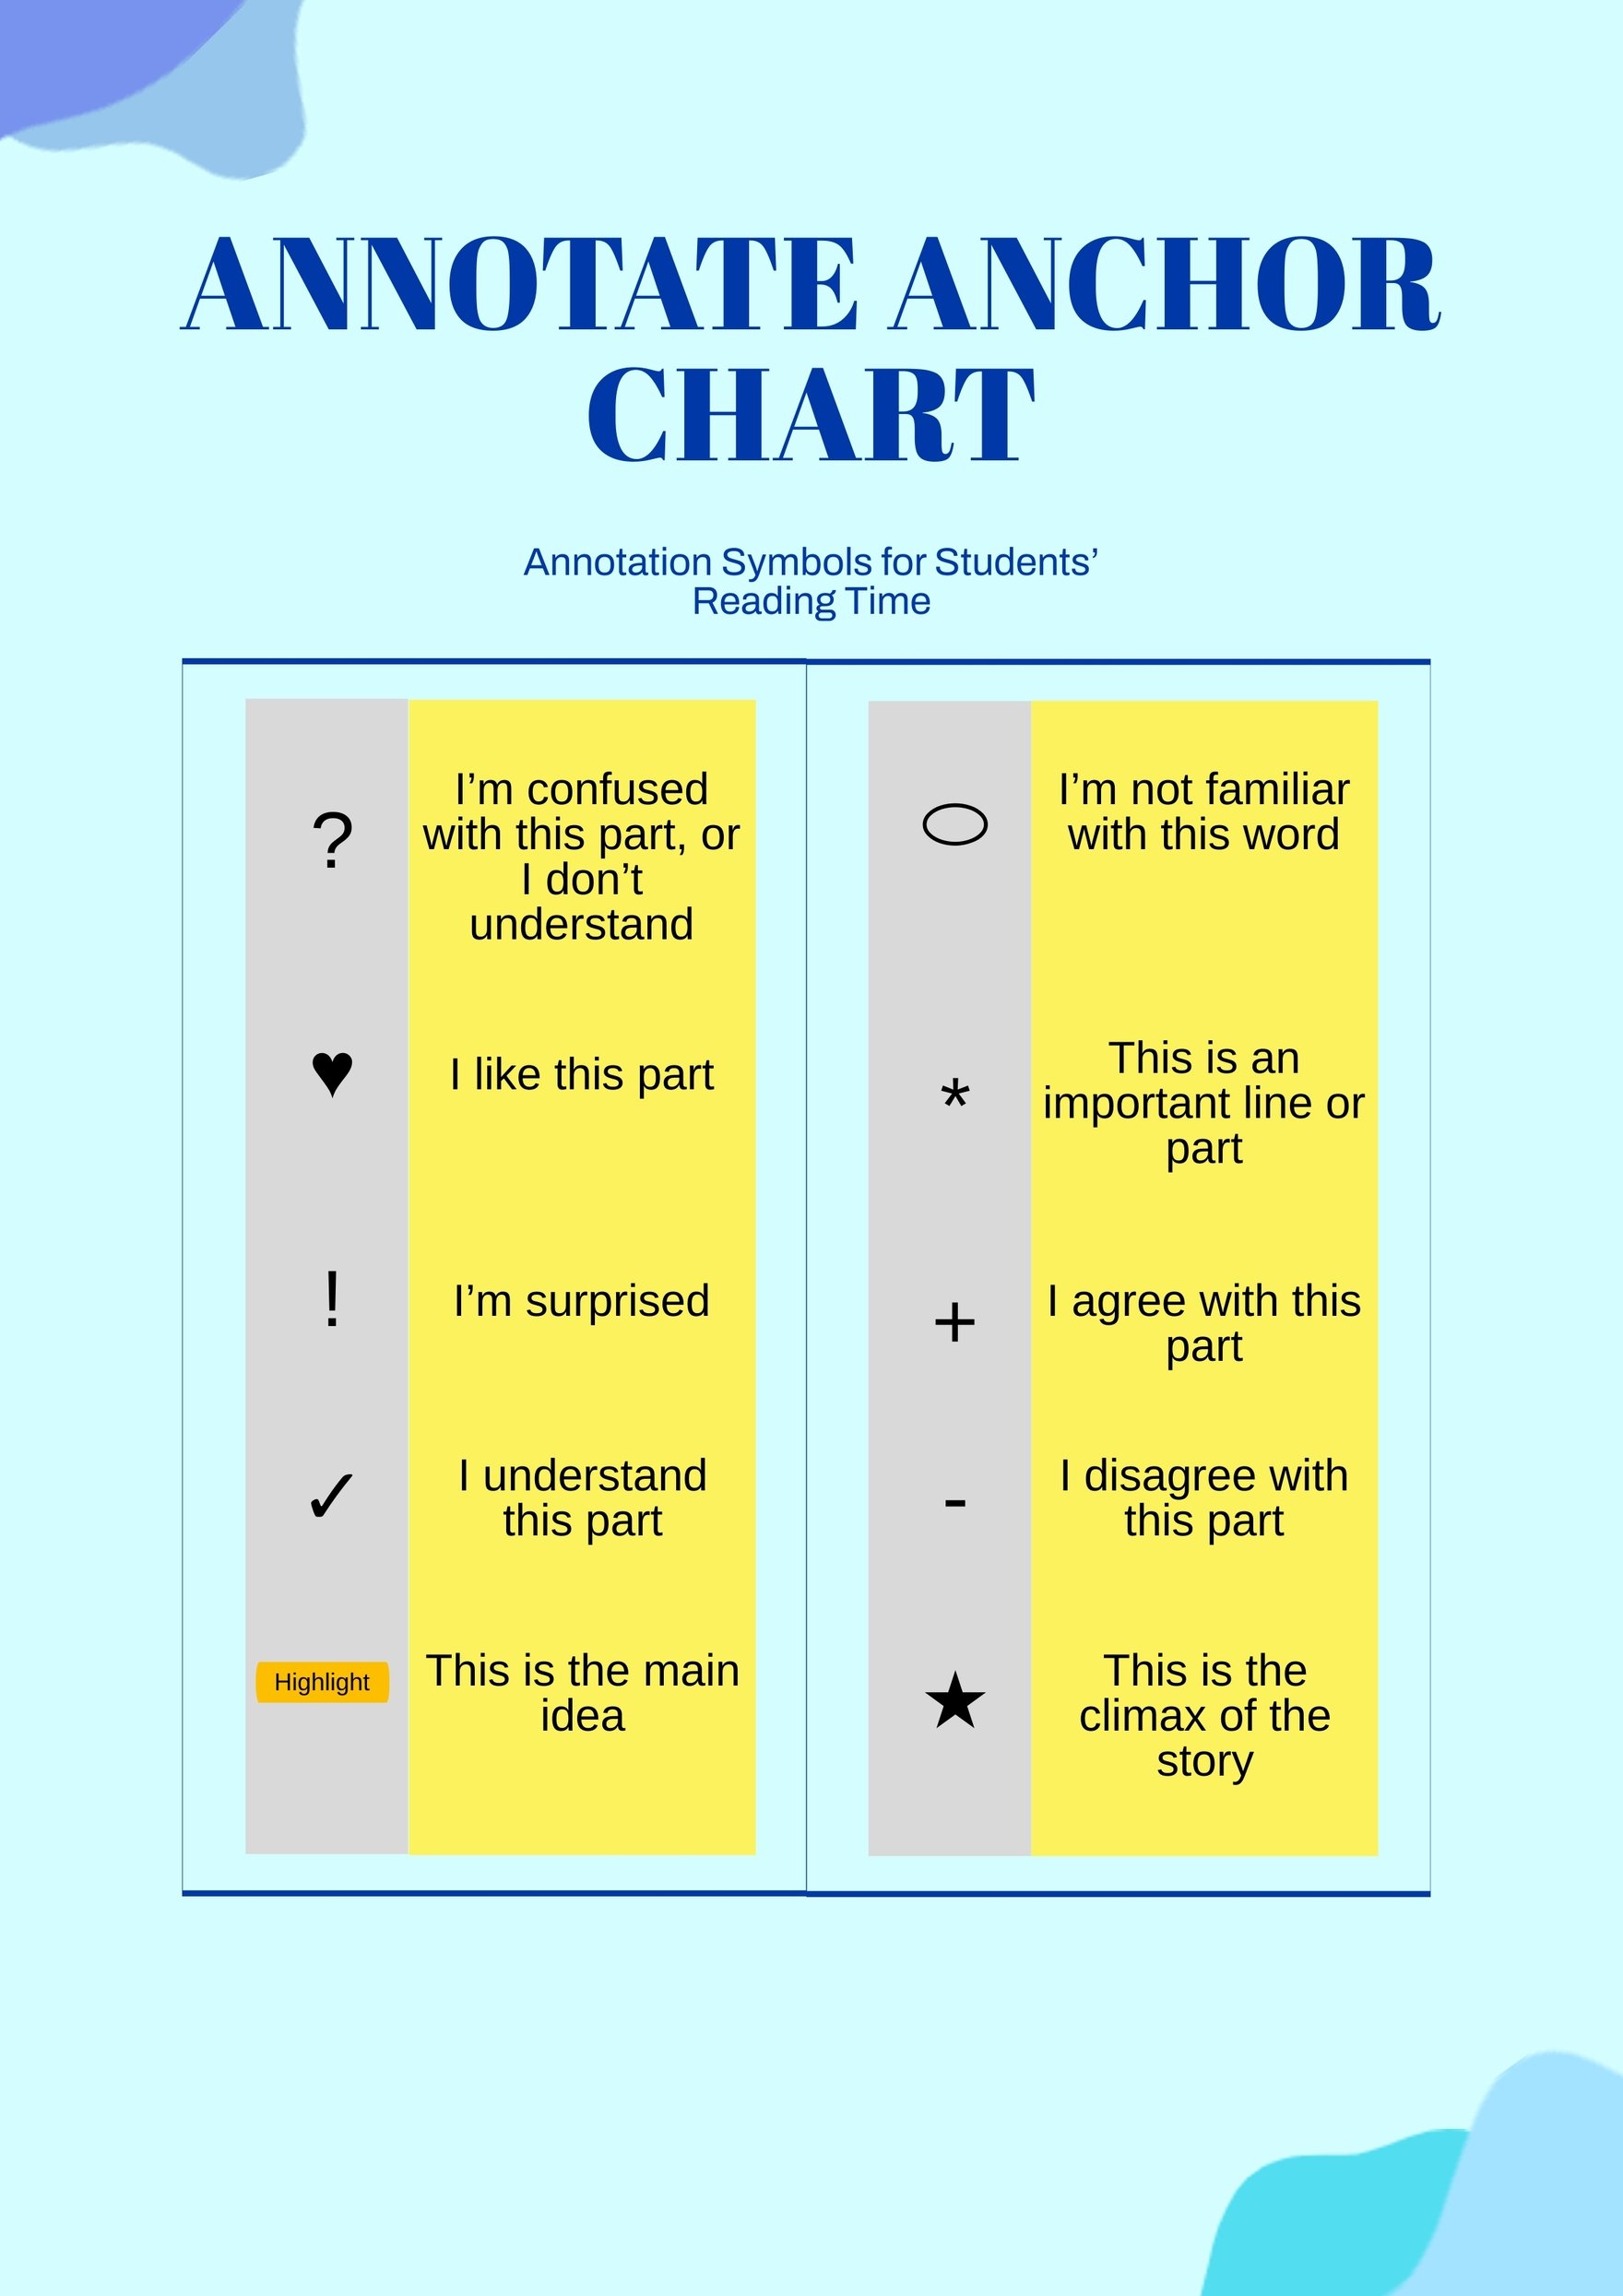 Annotate Anchor Chart in PDF, Illustrator